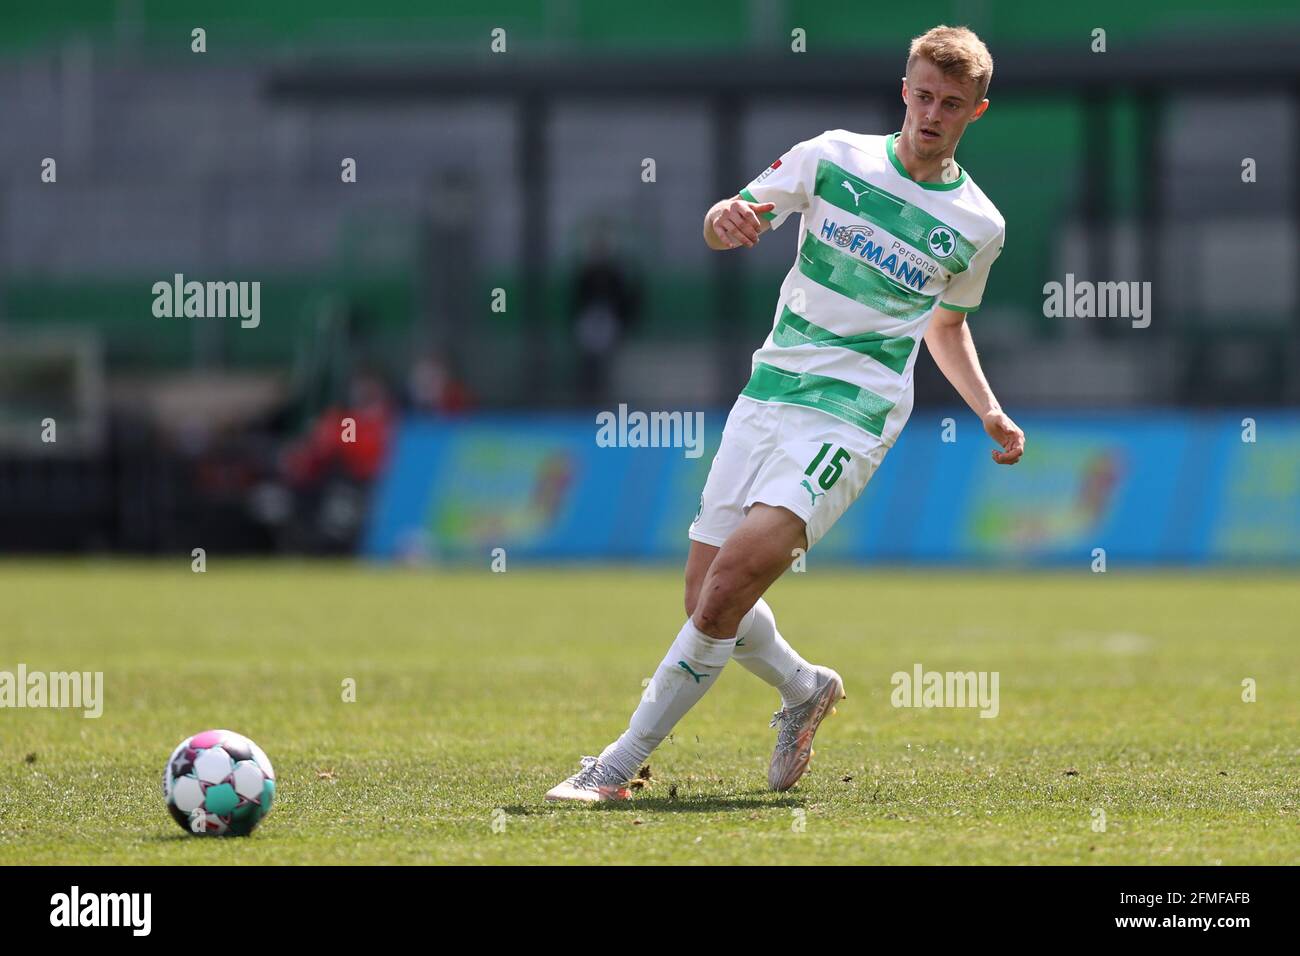 08 May 2021, Bavaria, Fürth: Football: 2. Bundesliga, SpVgg Greuther Fürth - Karlsruher SC, Matchday 32 at Sportpark Ronhof Thomas Sommer. Sebastian Ernst from Fürth plays the ball. Photo: Daniel Karmann/dpa - IMPORTANT NOTE: In accordance with the regulations of the DFL Deutsche Fußball Liga and/or the DFB Deutscher Fußball-Bund, it is prohibited to use or have used photographs taken in the stadium and/or of the match in the form of sequence pictures and/or video-like photo series. Stock Photo